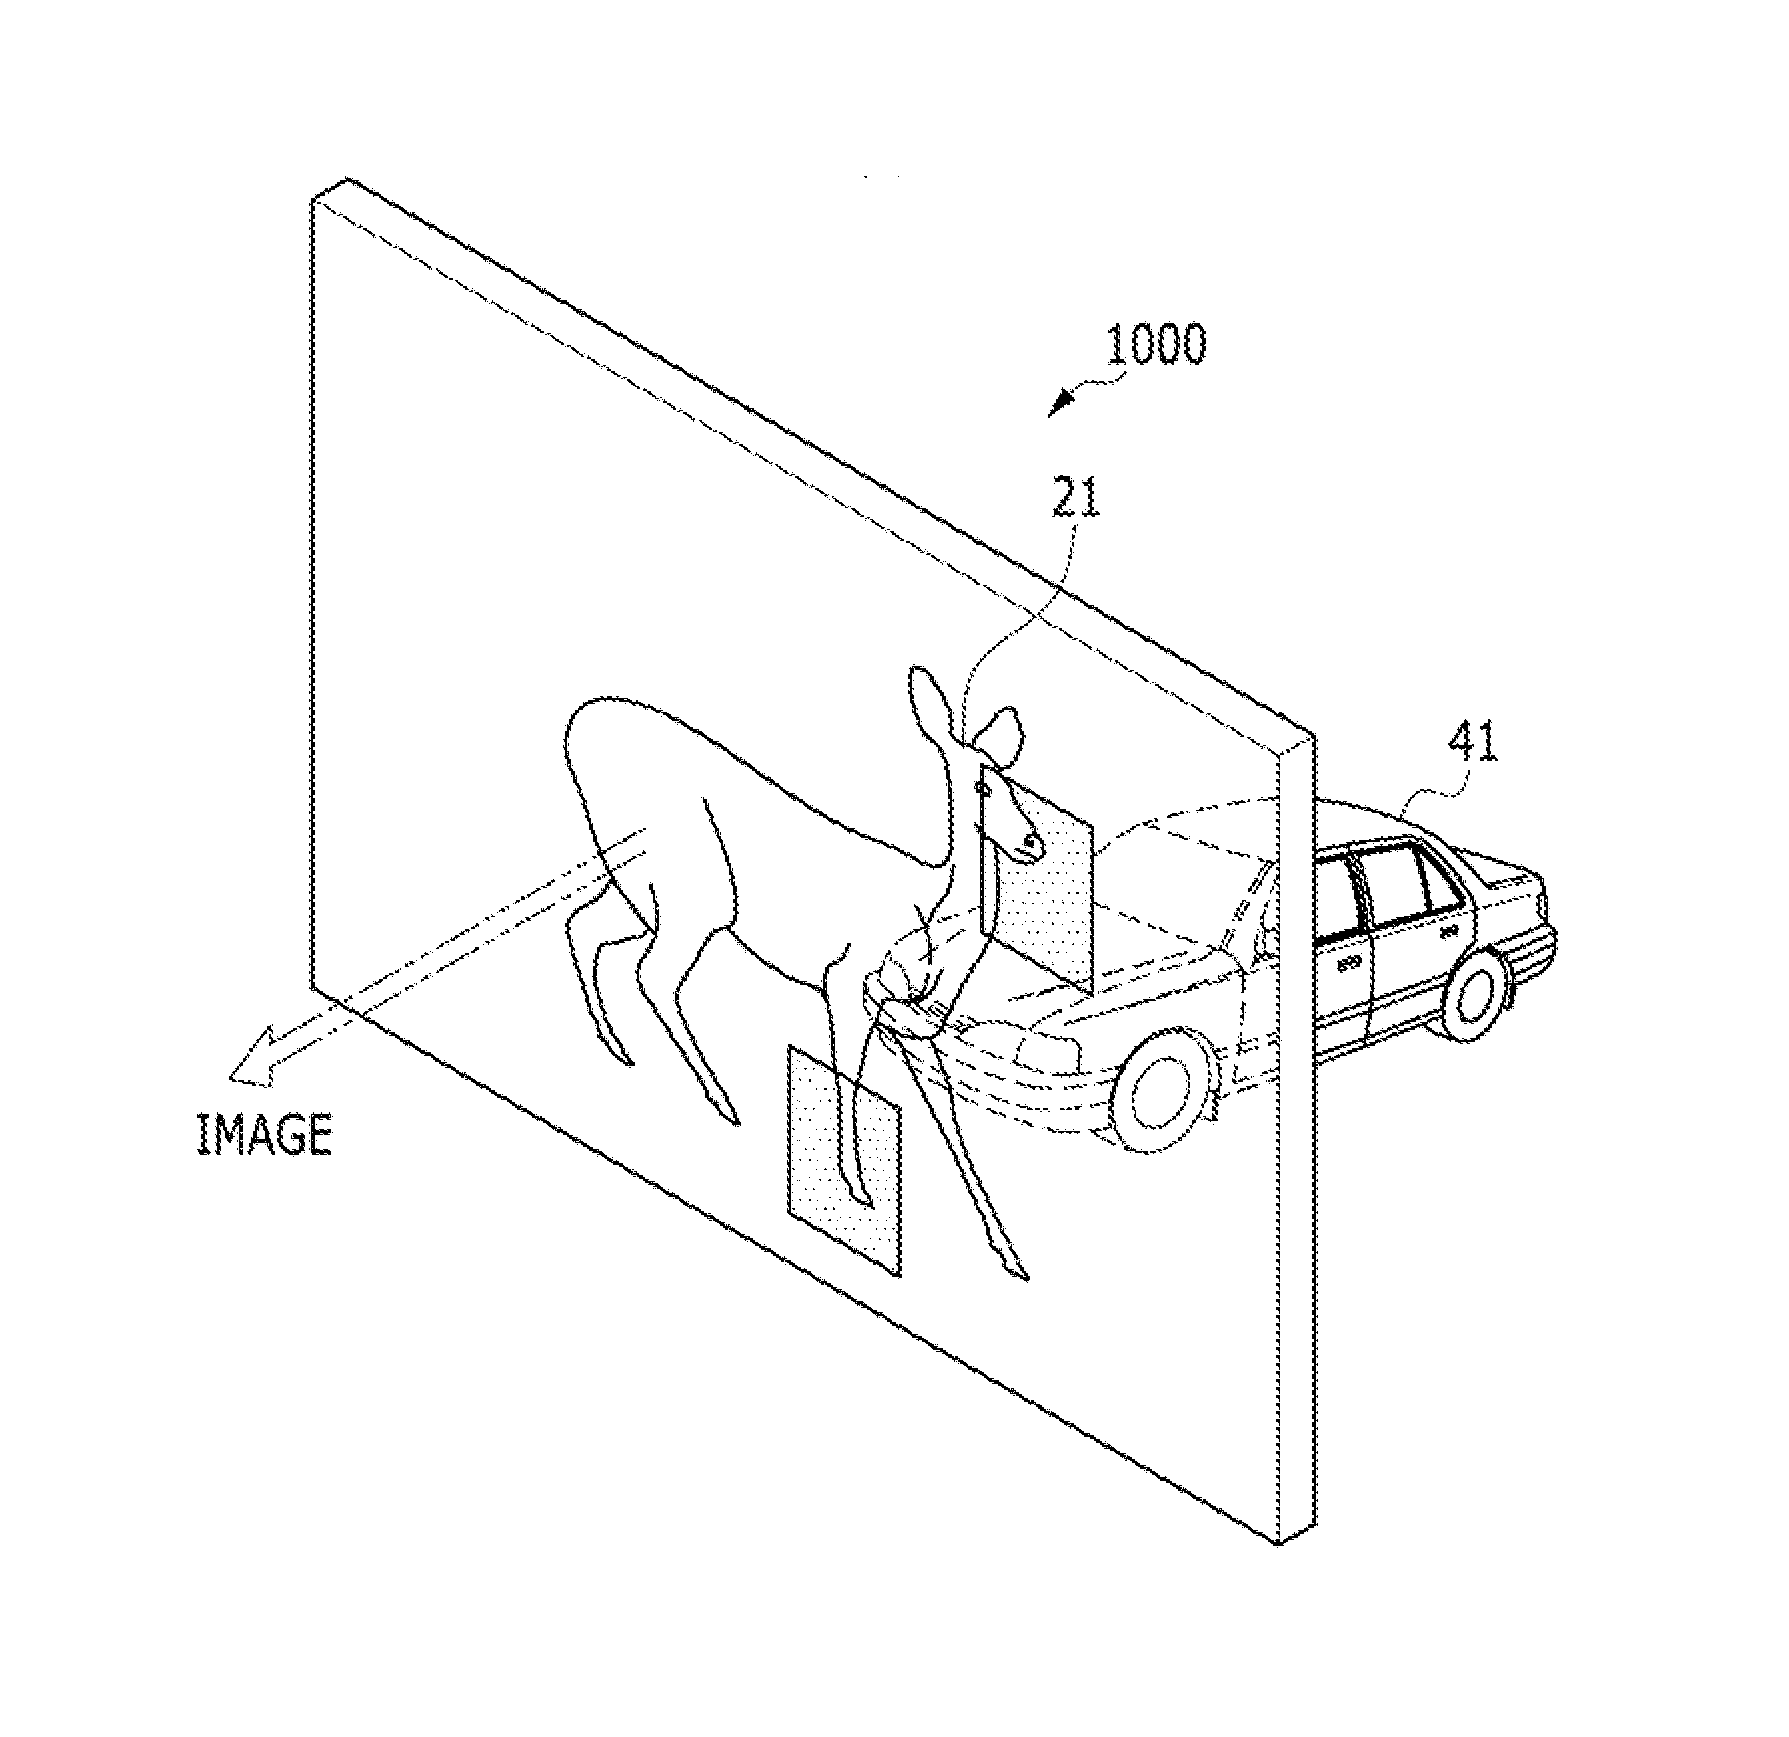 Transparent display device and method of manufacturing the same